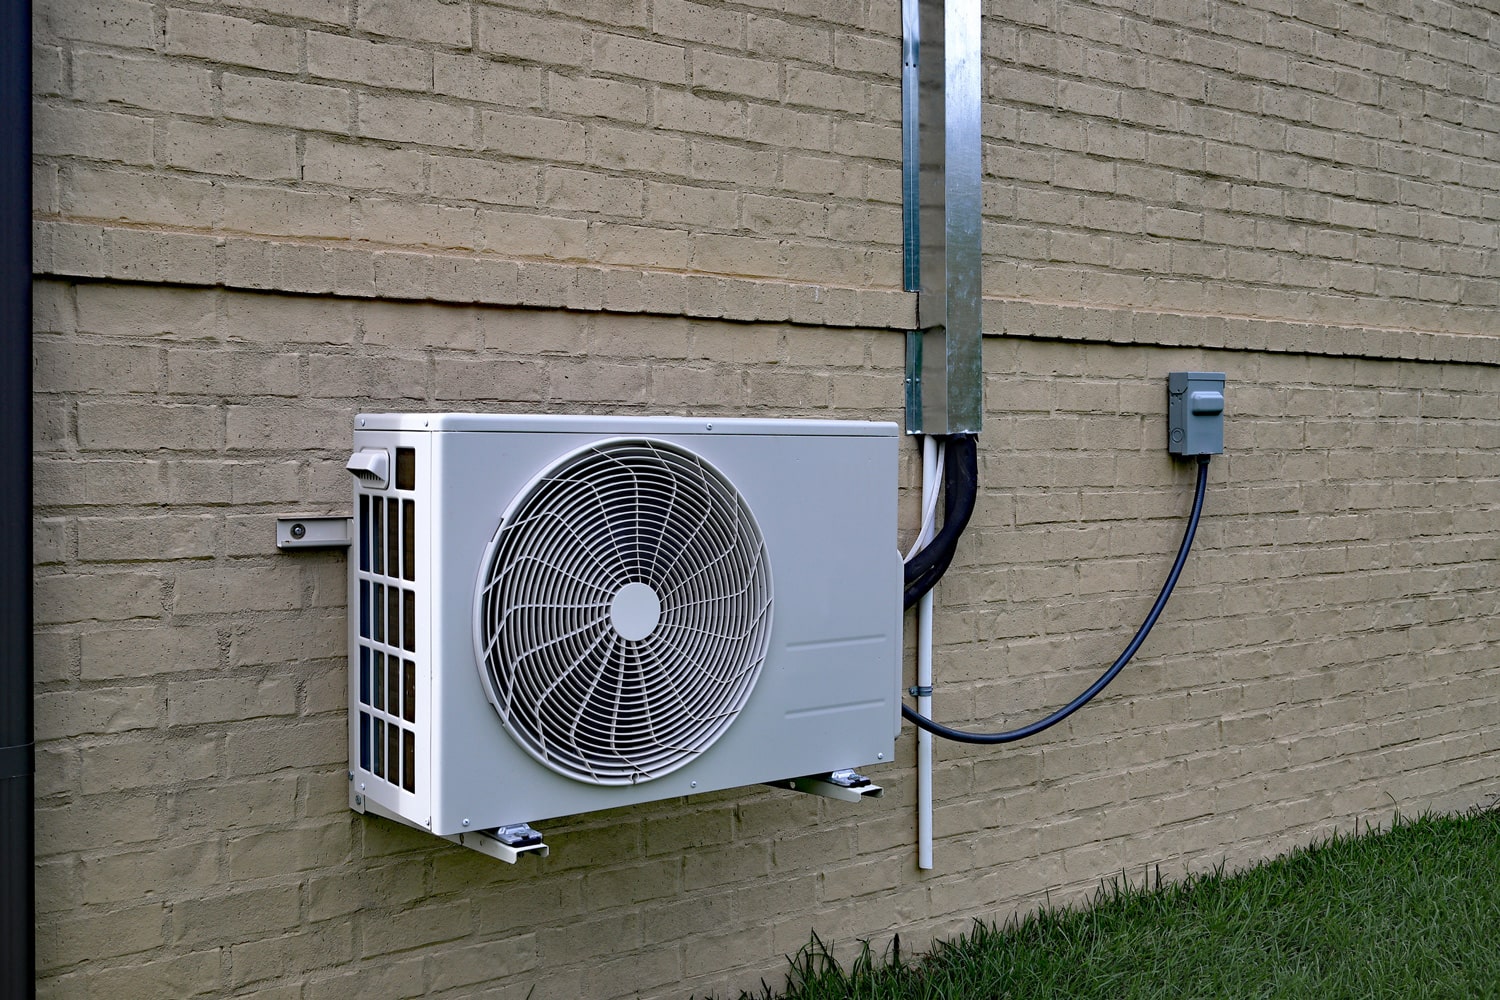 Air Conditioner mini split system next to home with painted brick wall and space